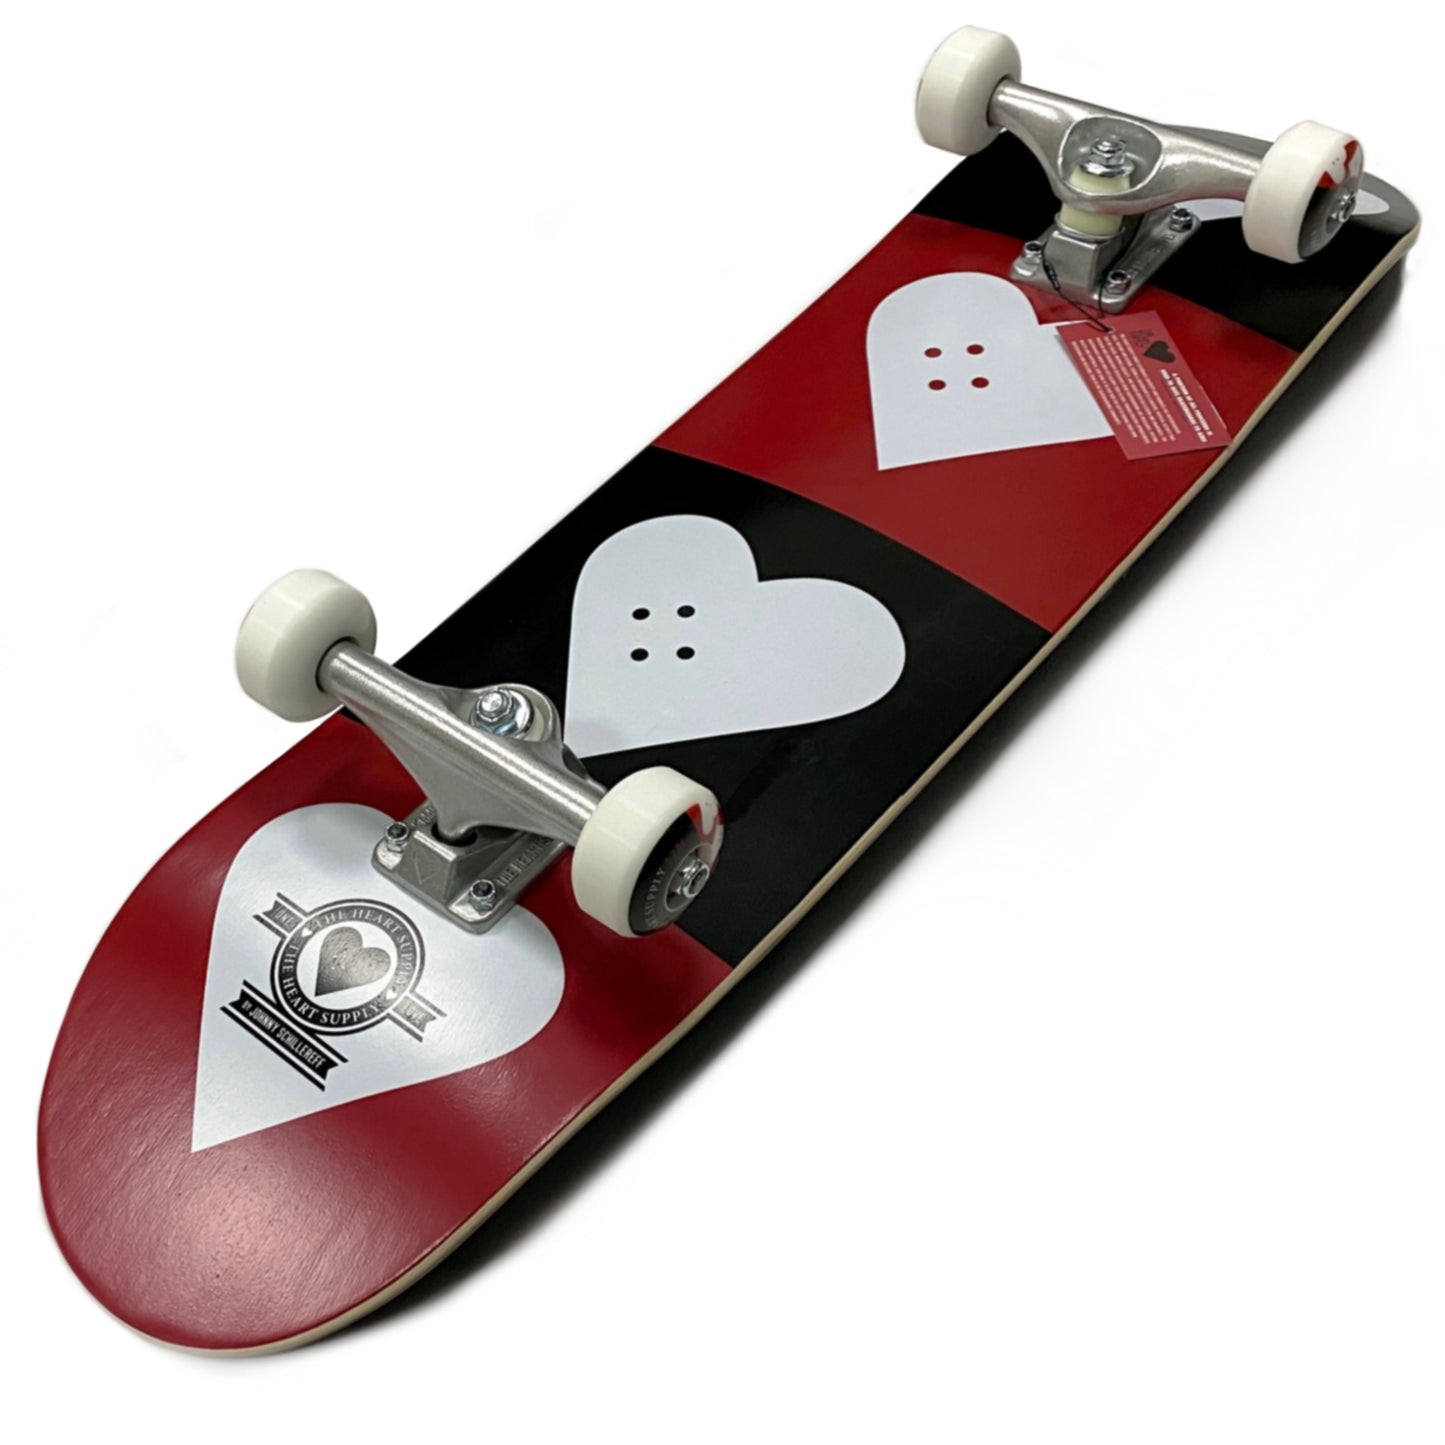 The Heart Supply Quad Logo Black & Red 7.75" Skateboard Complete